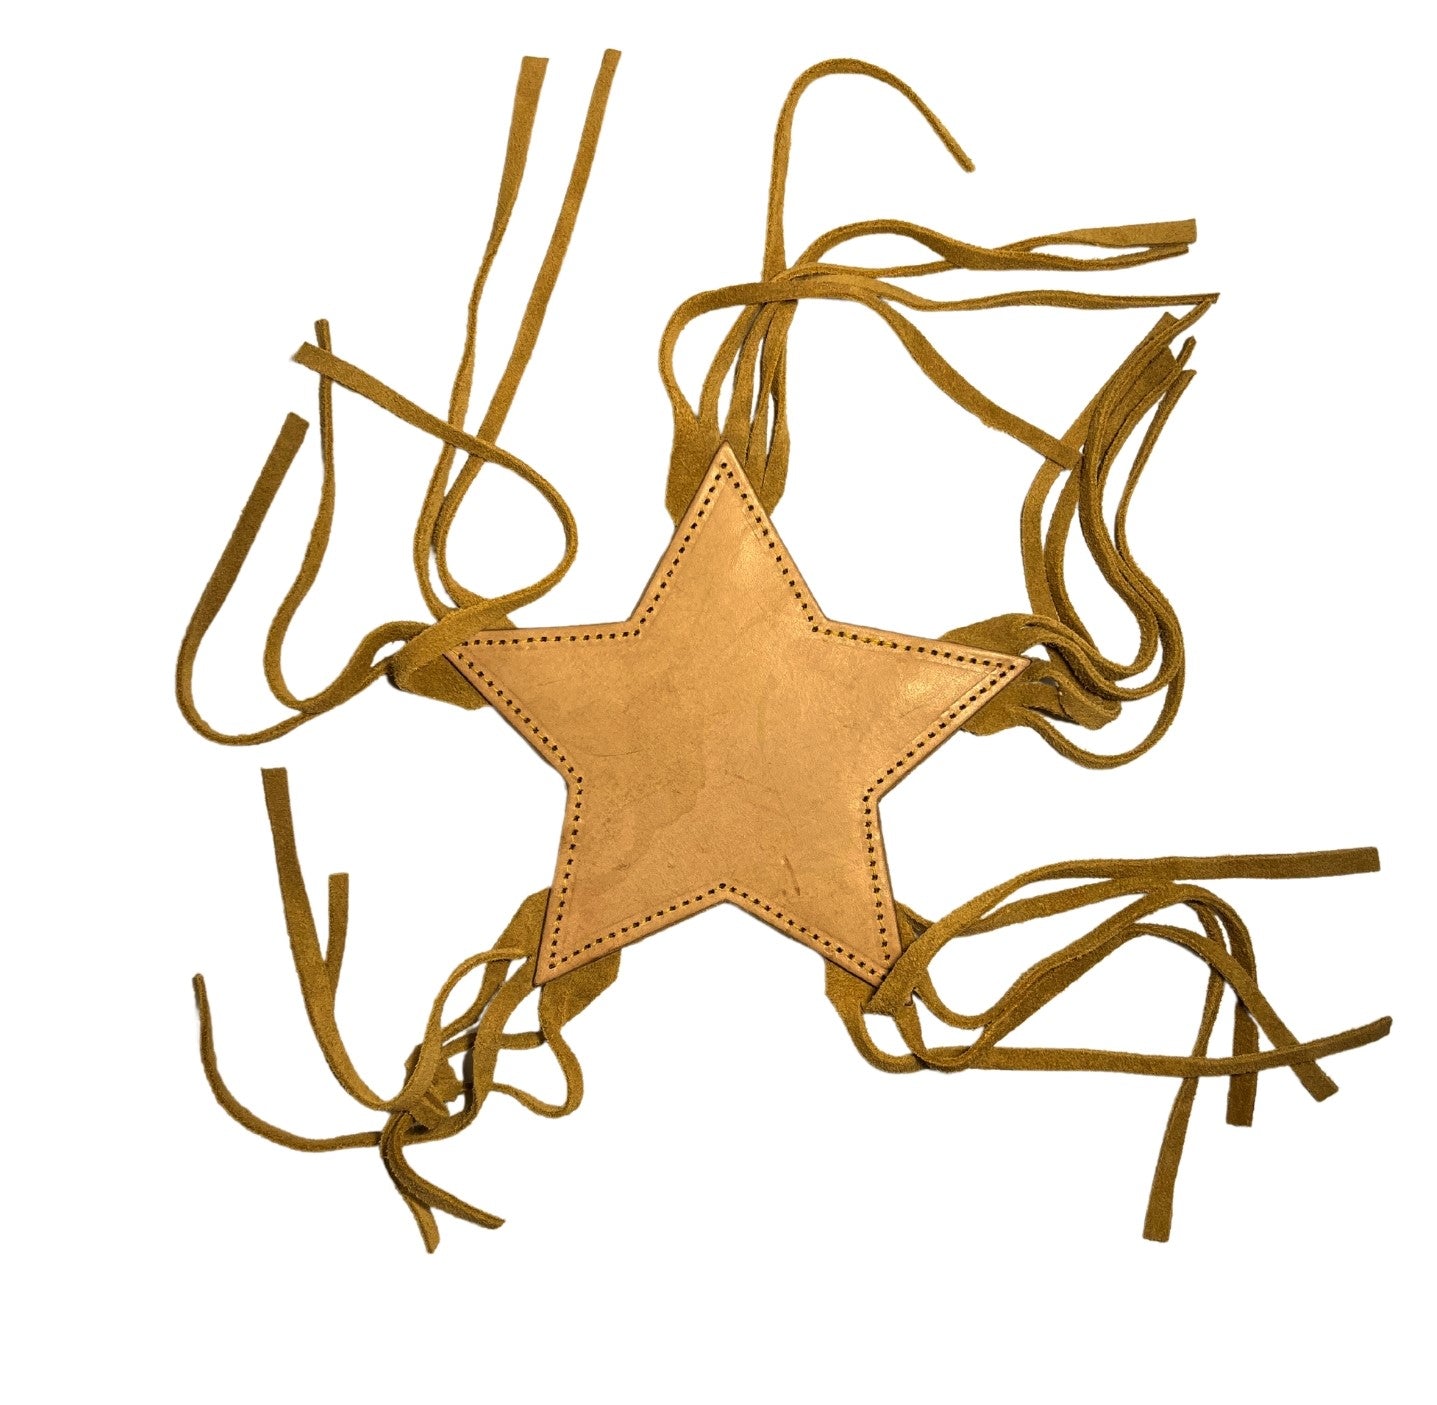 A Georgie Paws golden buffalo leather Star Teething Toy for Puppies with a texturized surface, surrounded by tangled thin leather strips, isolated on a white background.